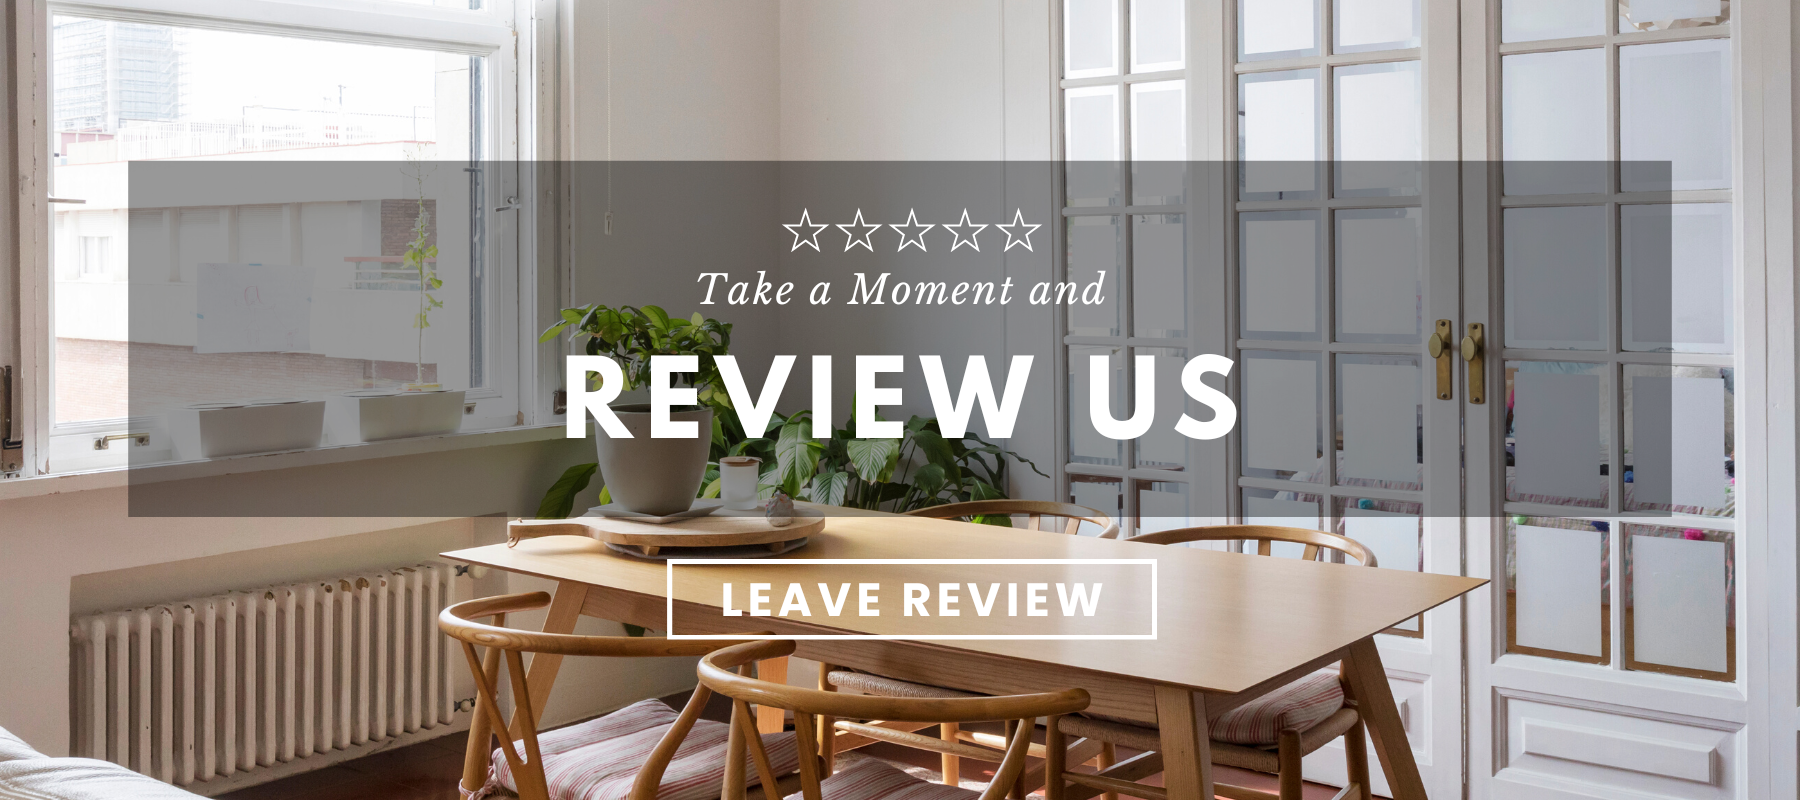 Leave review banner